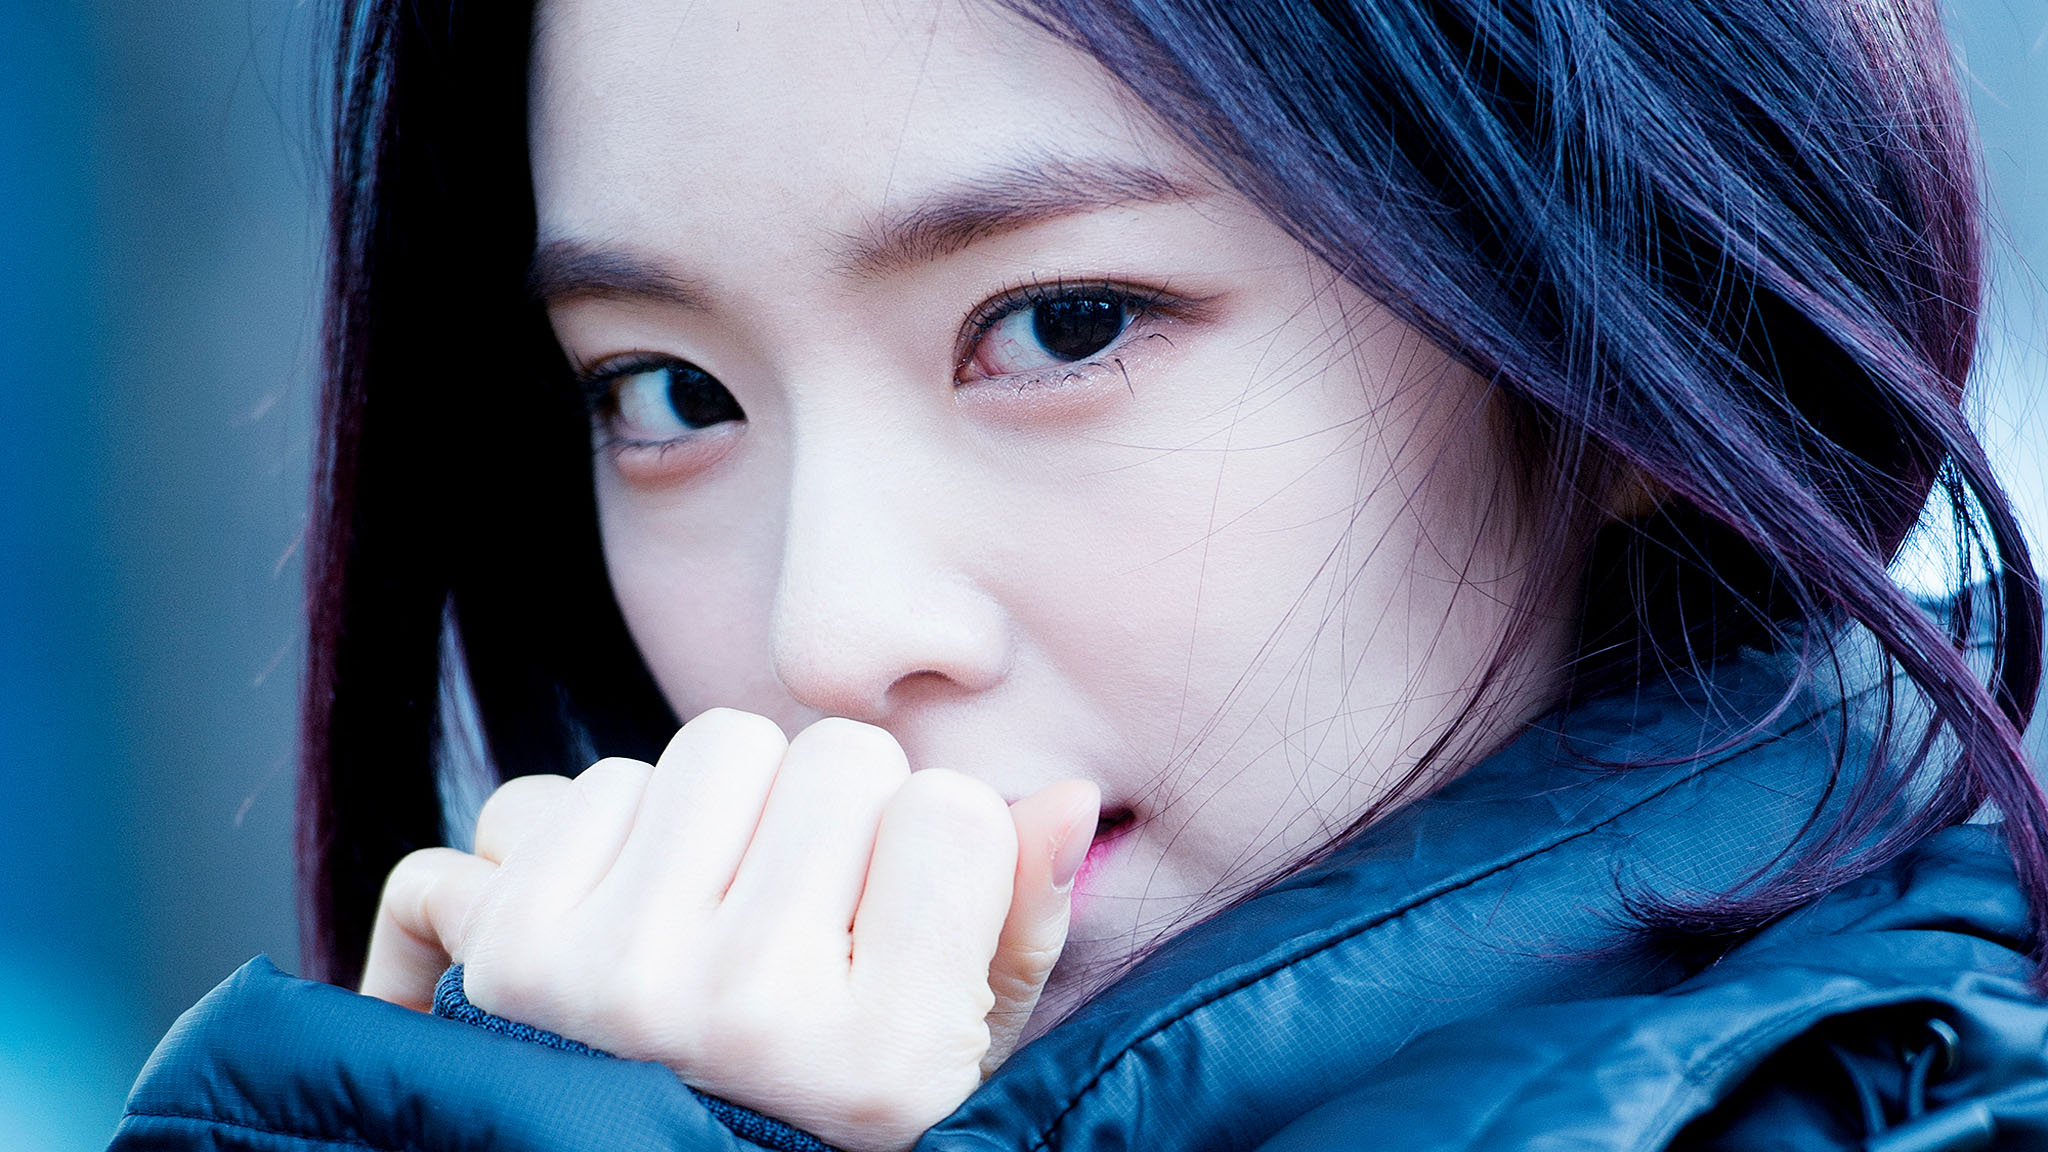 Red Velvet images IRene 19 HD wallpaper and background photos